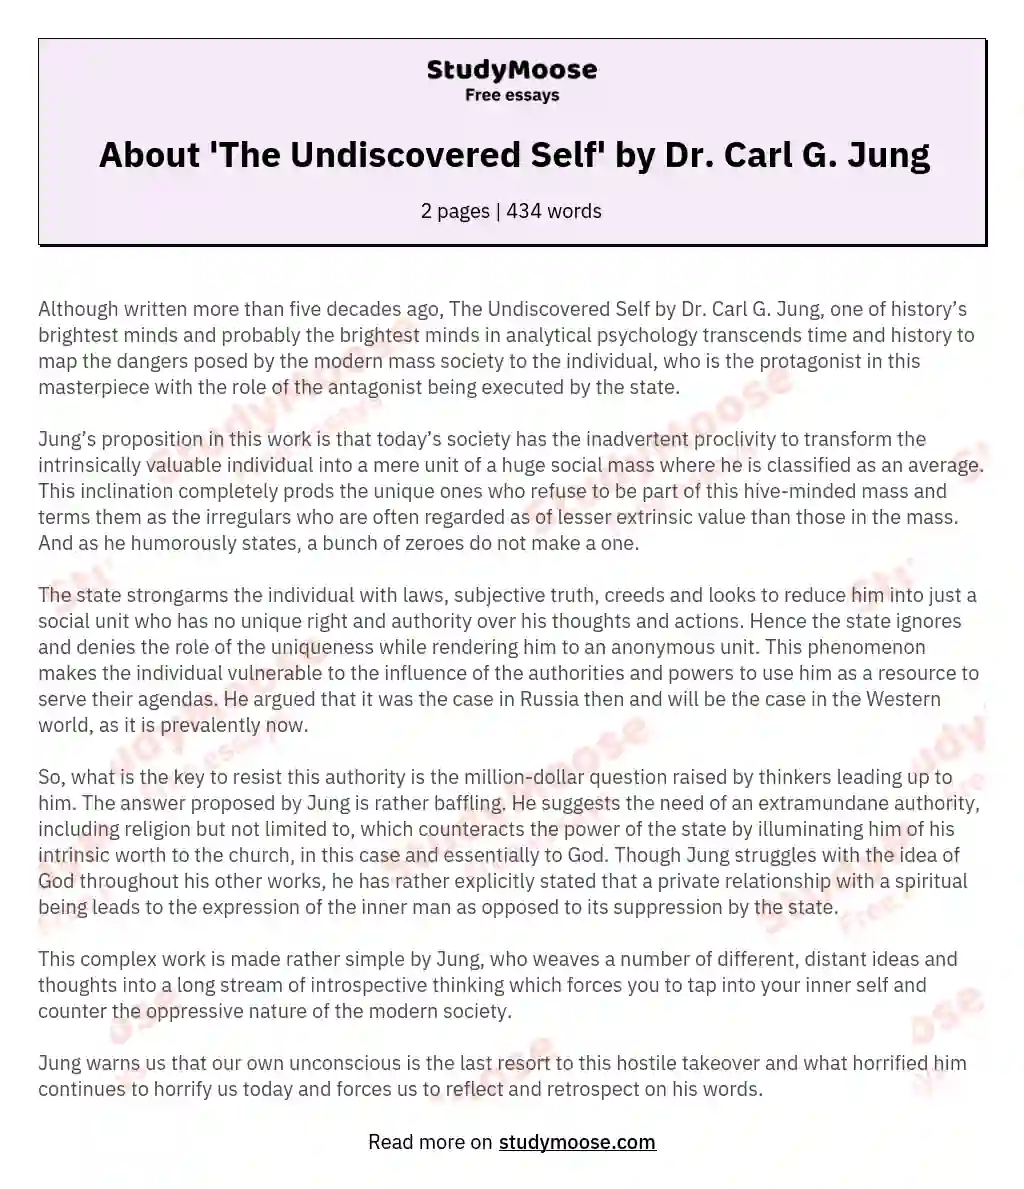 About 'The Undiscovered Self' by Dr. Carl G. Jung essay